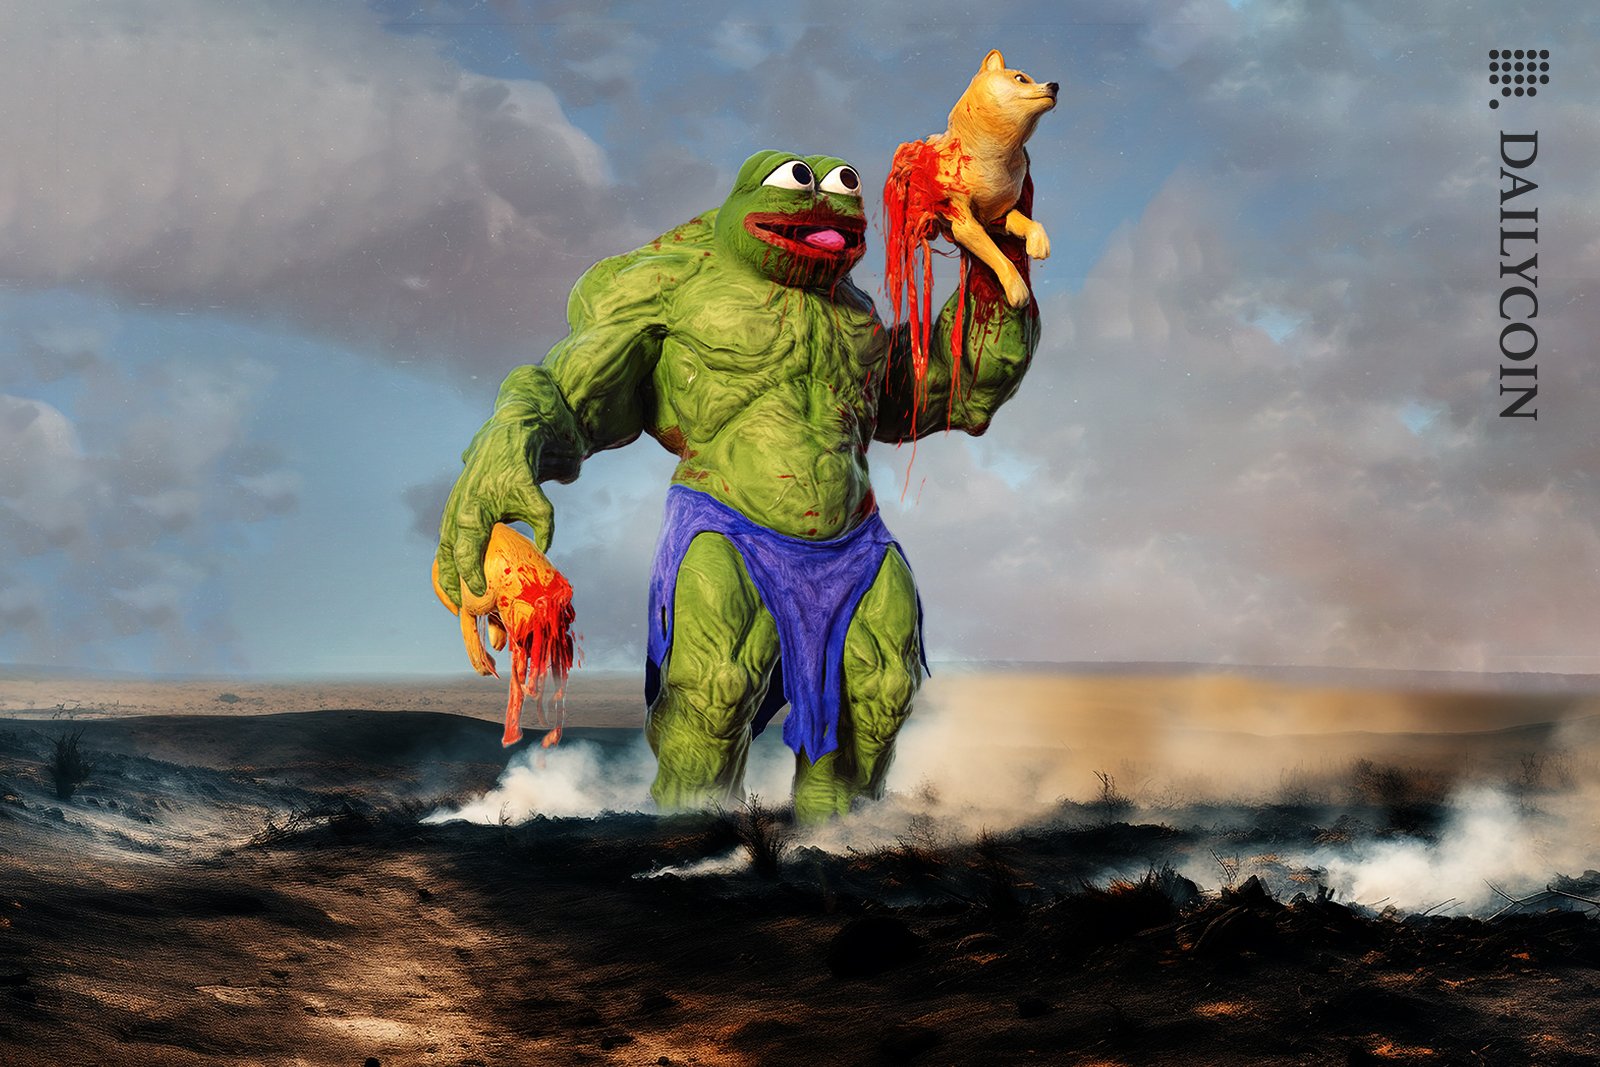 A giant muscular PEPE Eating DOGE by Beeple, in a smoky land.